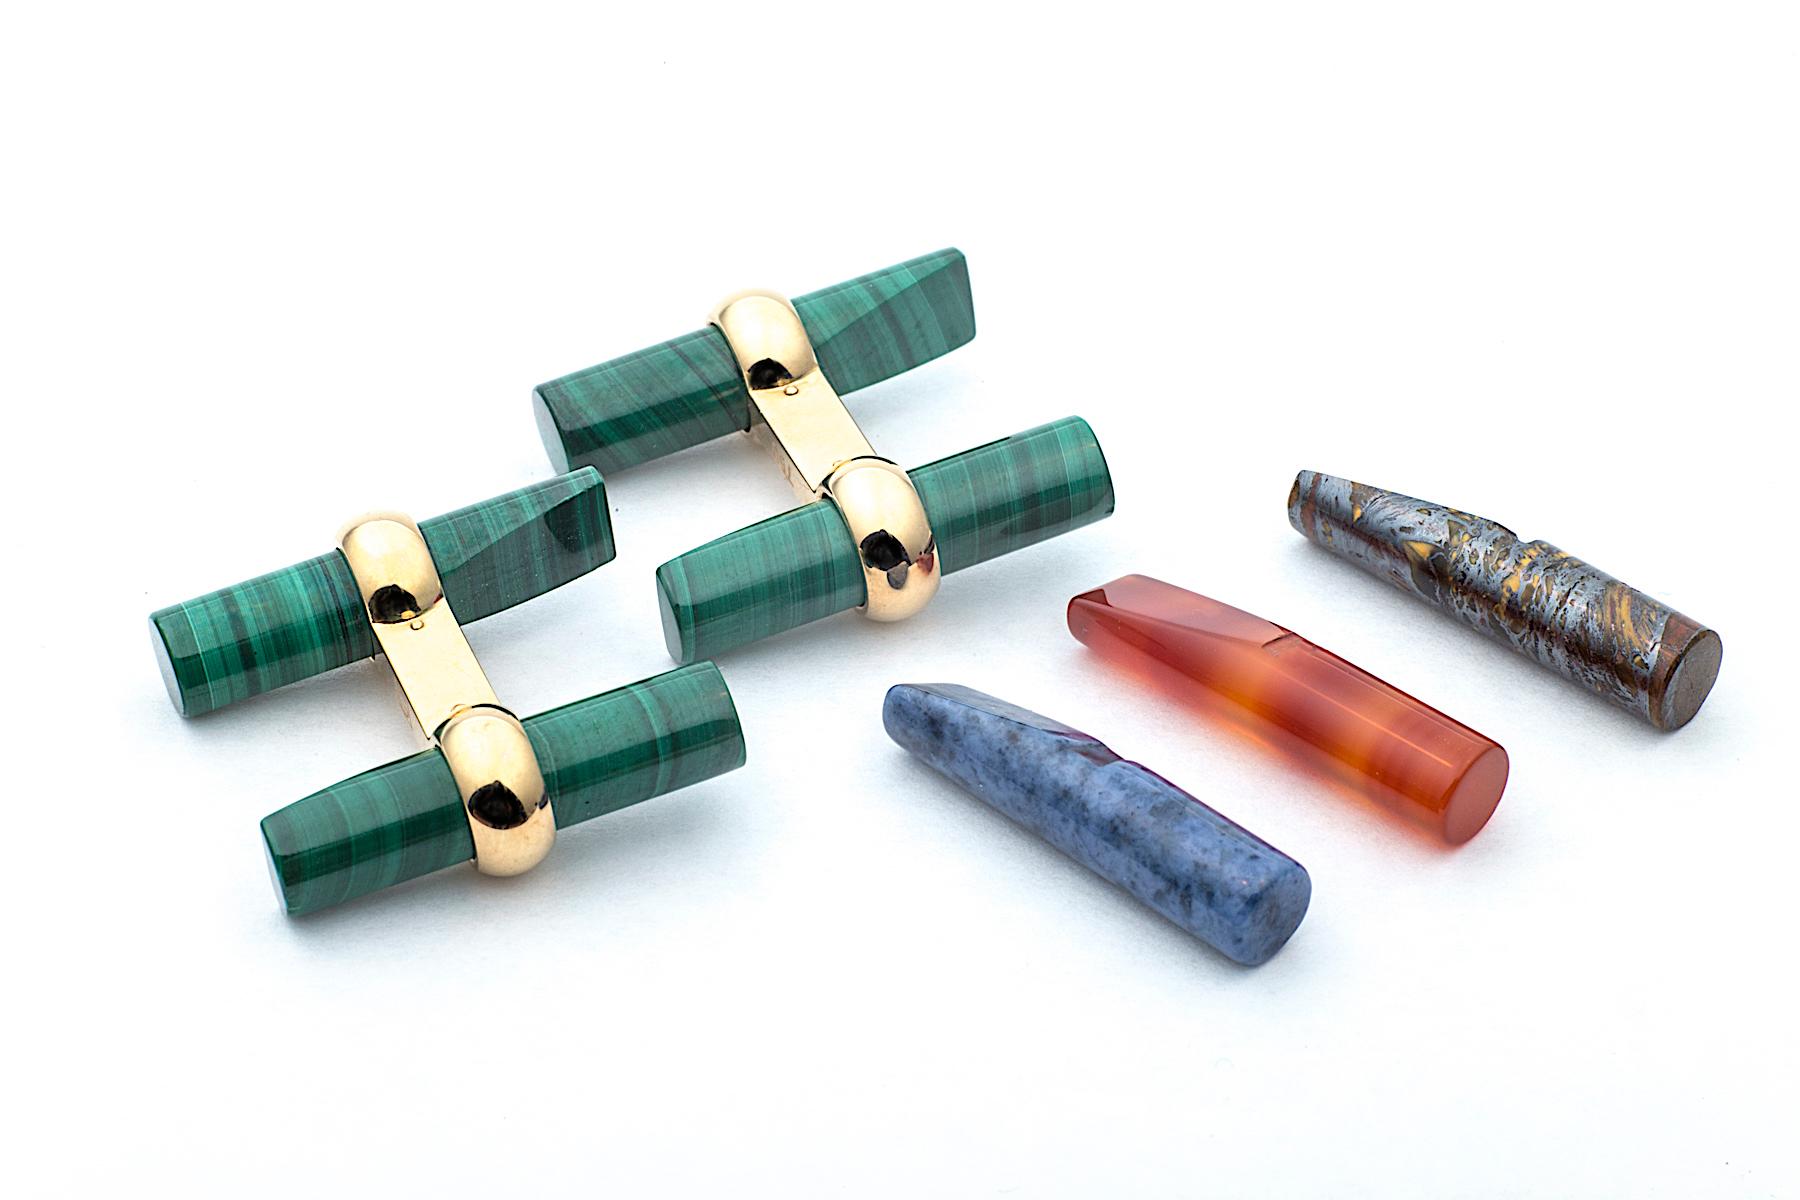 Pass the baton and win the race with these handmade interchangeable natural colored stone cufflinks!  With four different baton shaped stones in handsome tiger iron (black/brown), malachite (green), Indian carnelian (deep coral), and dumortierite